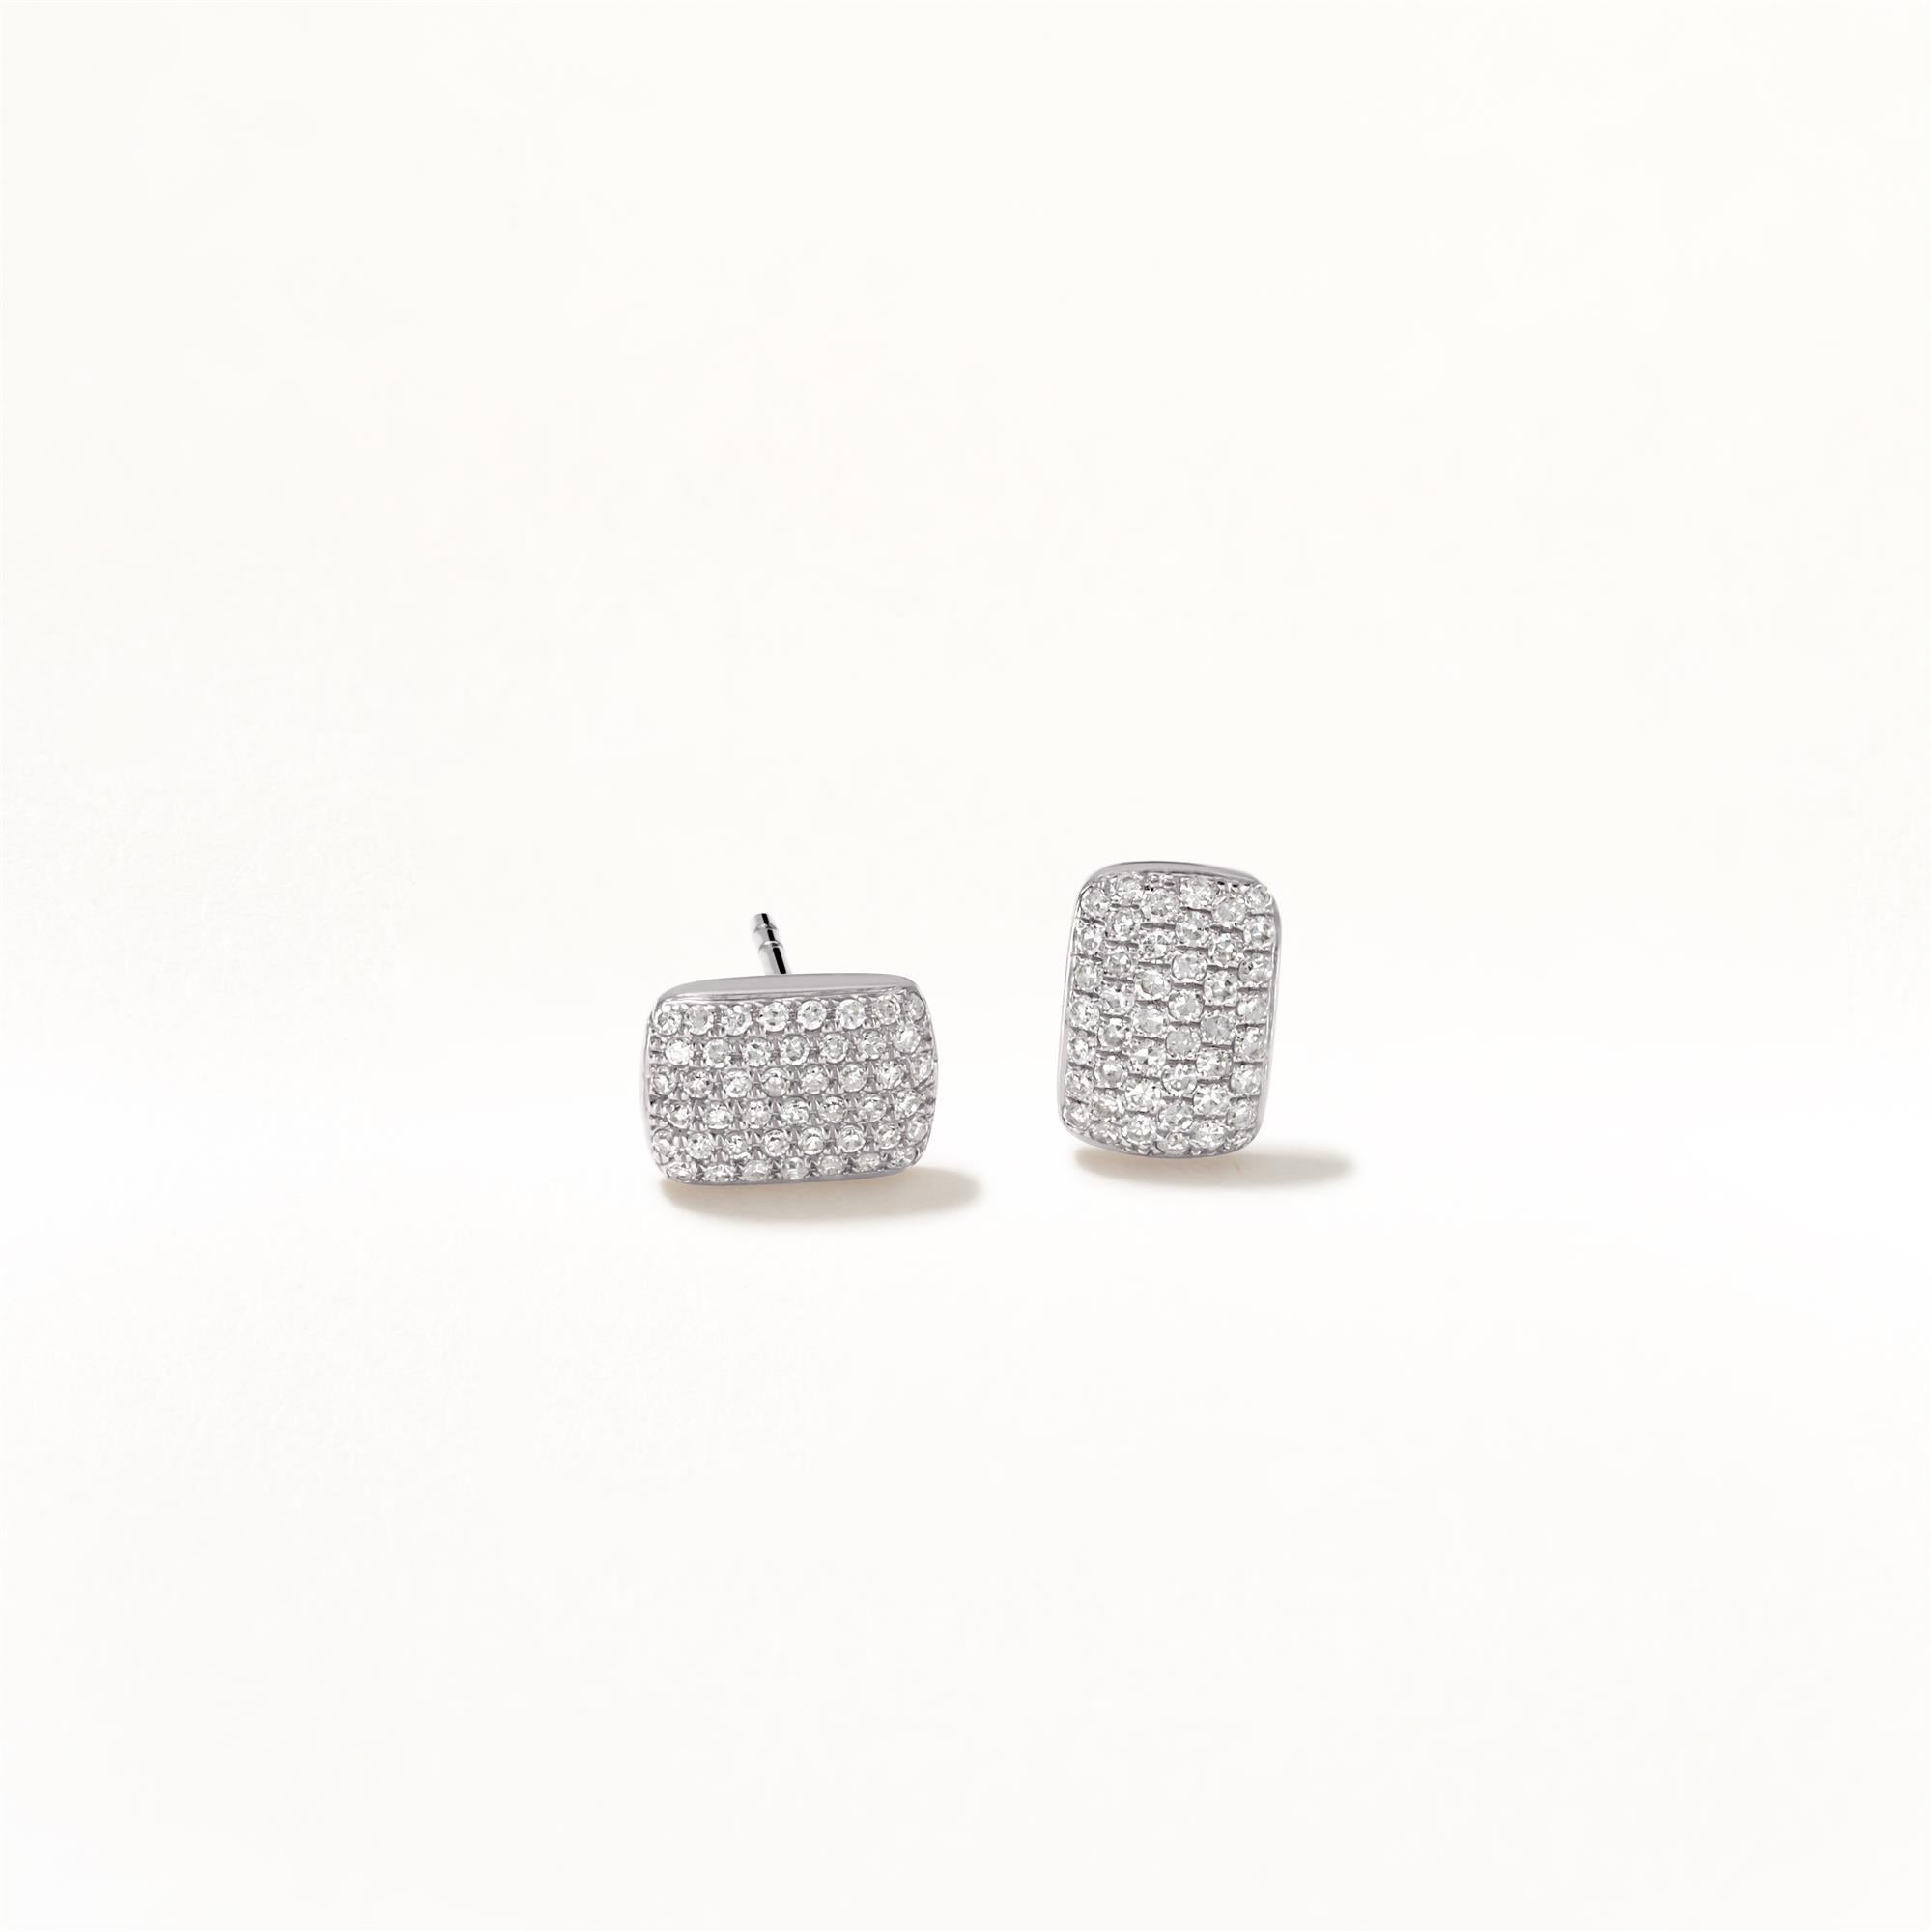 Round Cut Luxle Pave Round Diamond Square Stud Earrings in 18k White Gold